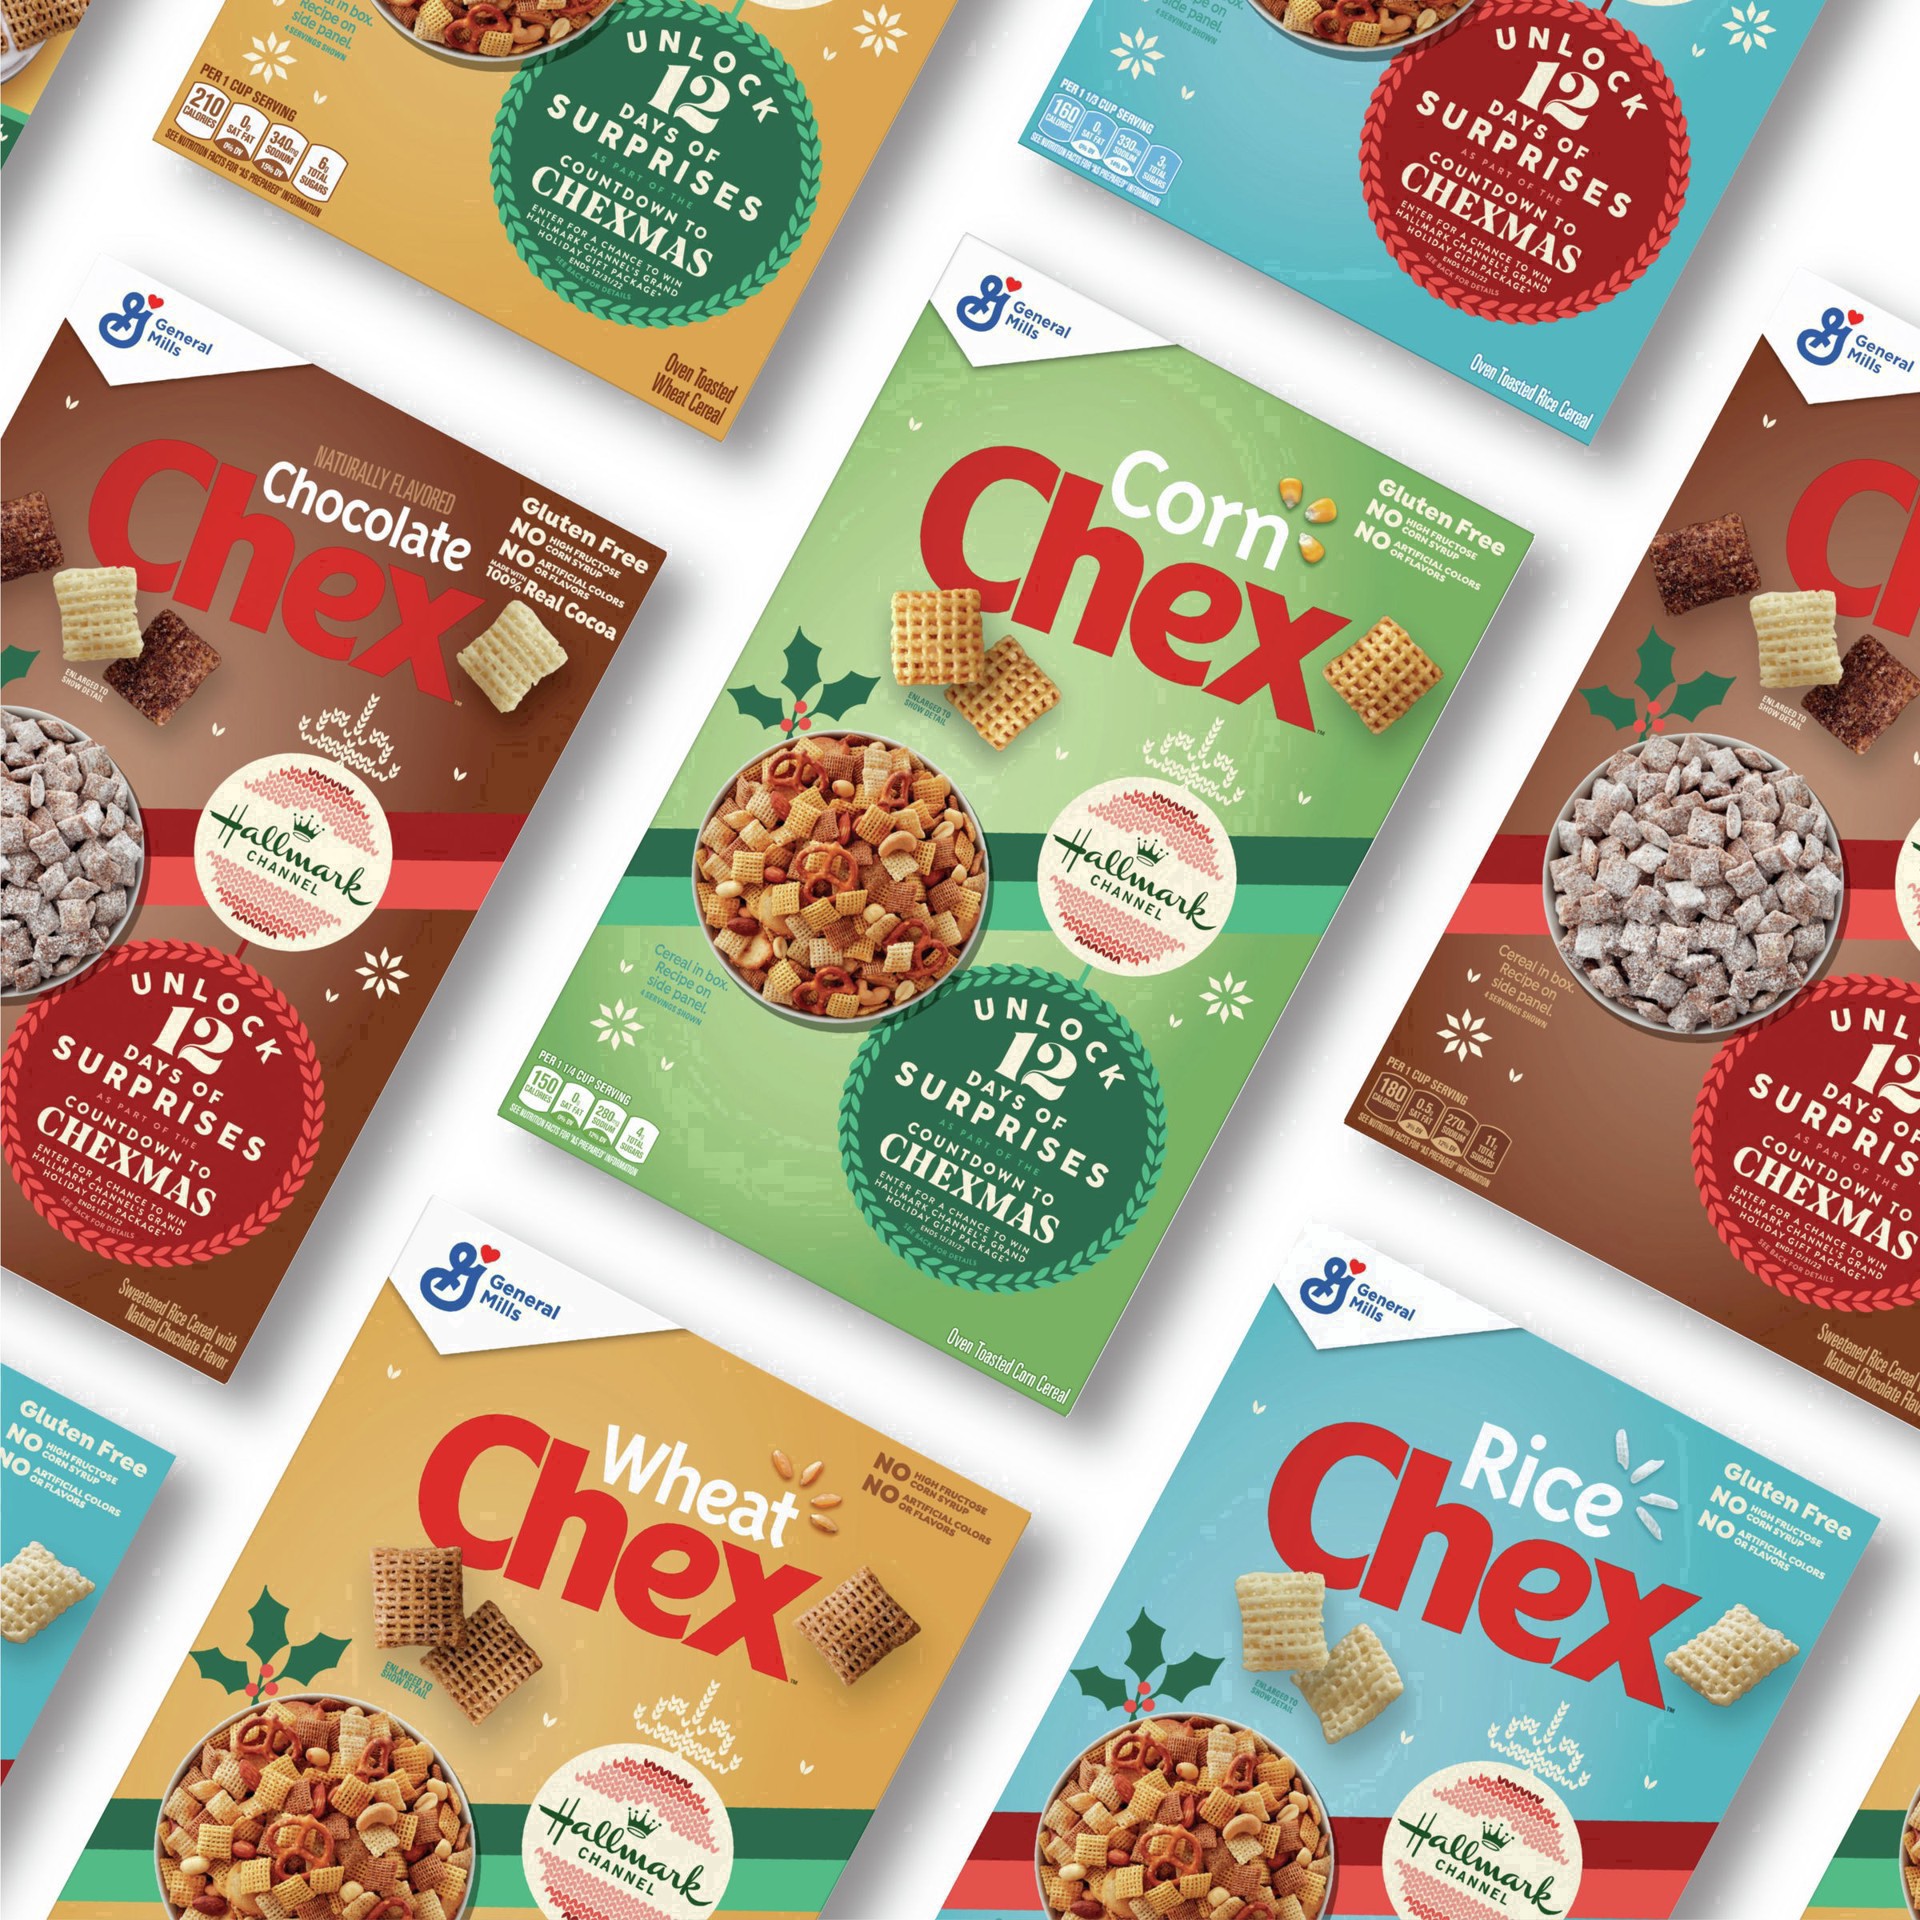 slide 4 of 122, Chex Chocolate Chex Cereal, Gluten Free Breakfast Cereal, Made with Whole Grain, 12.8 oz, 14.25 oz